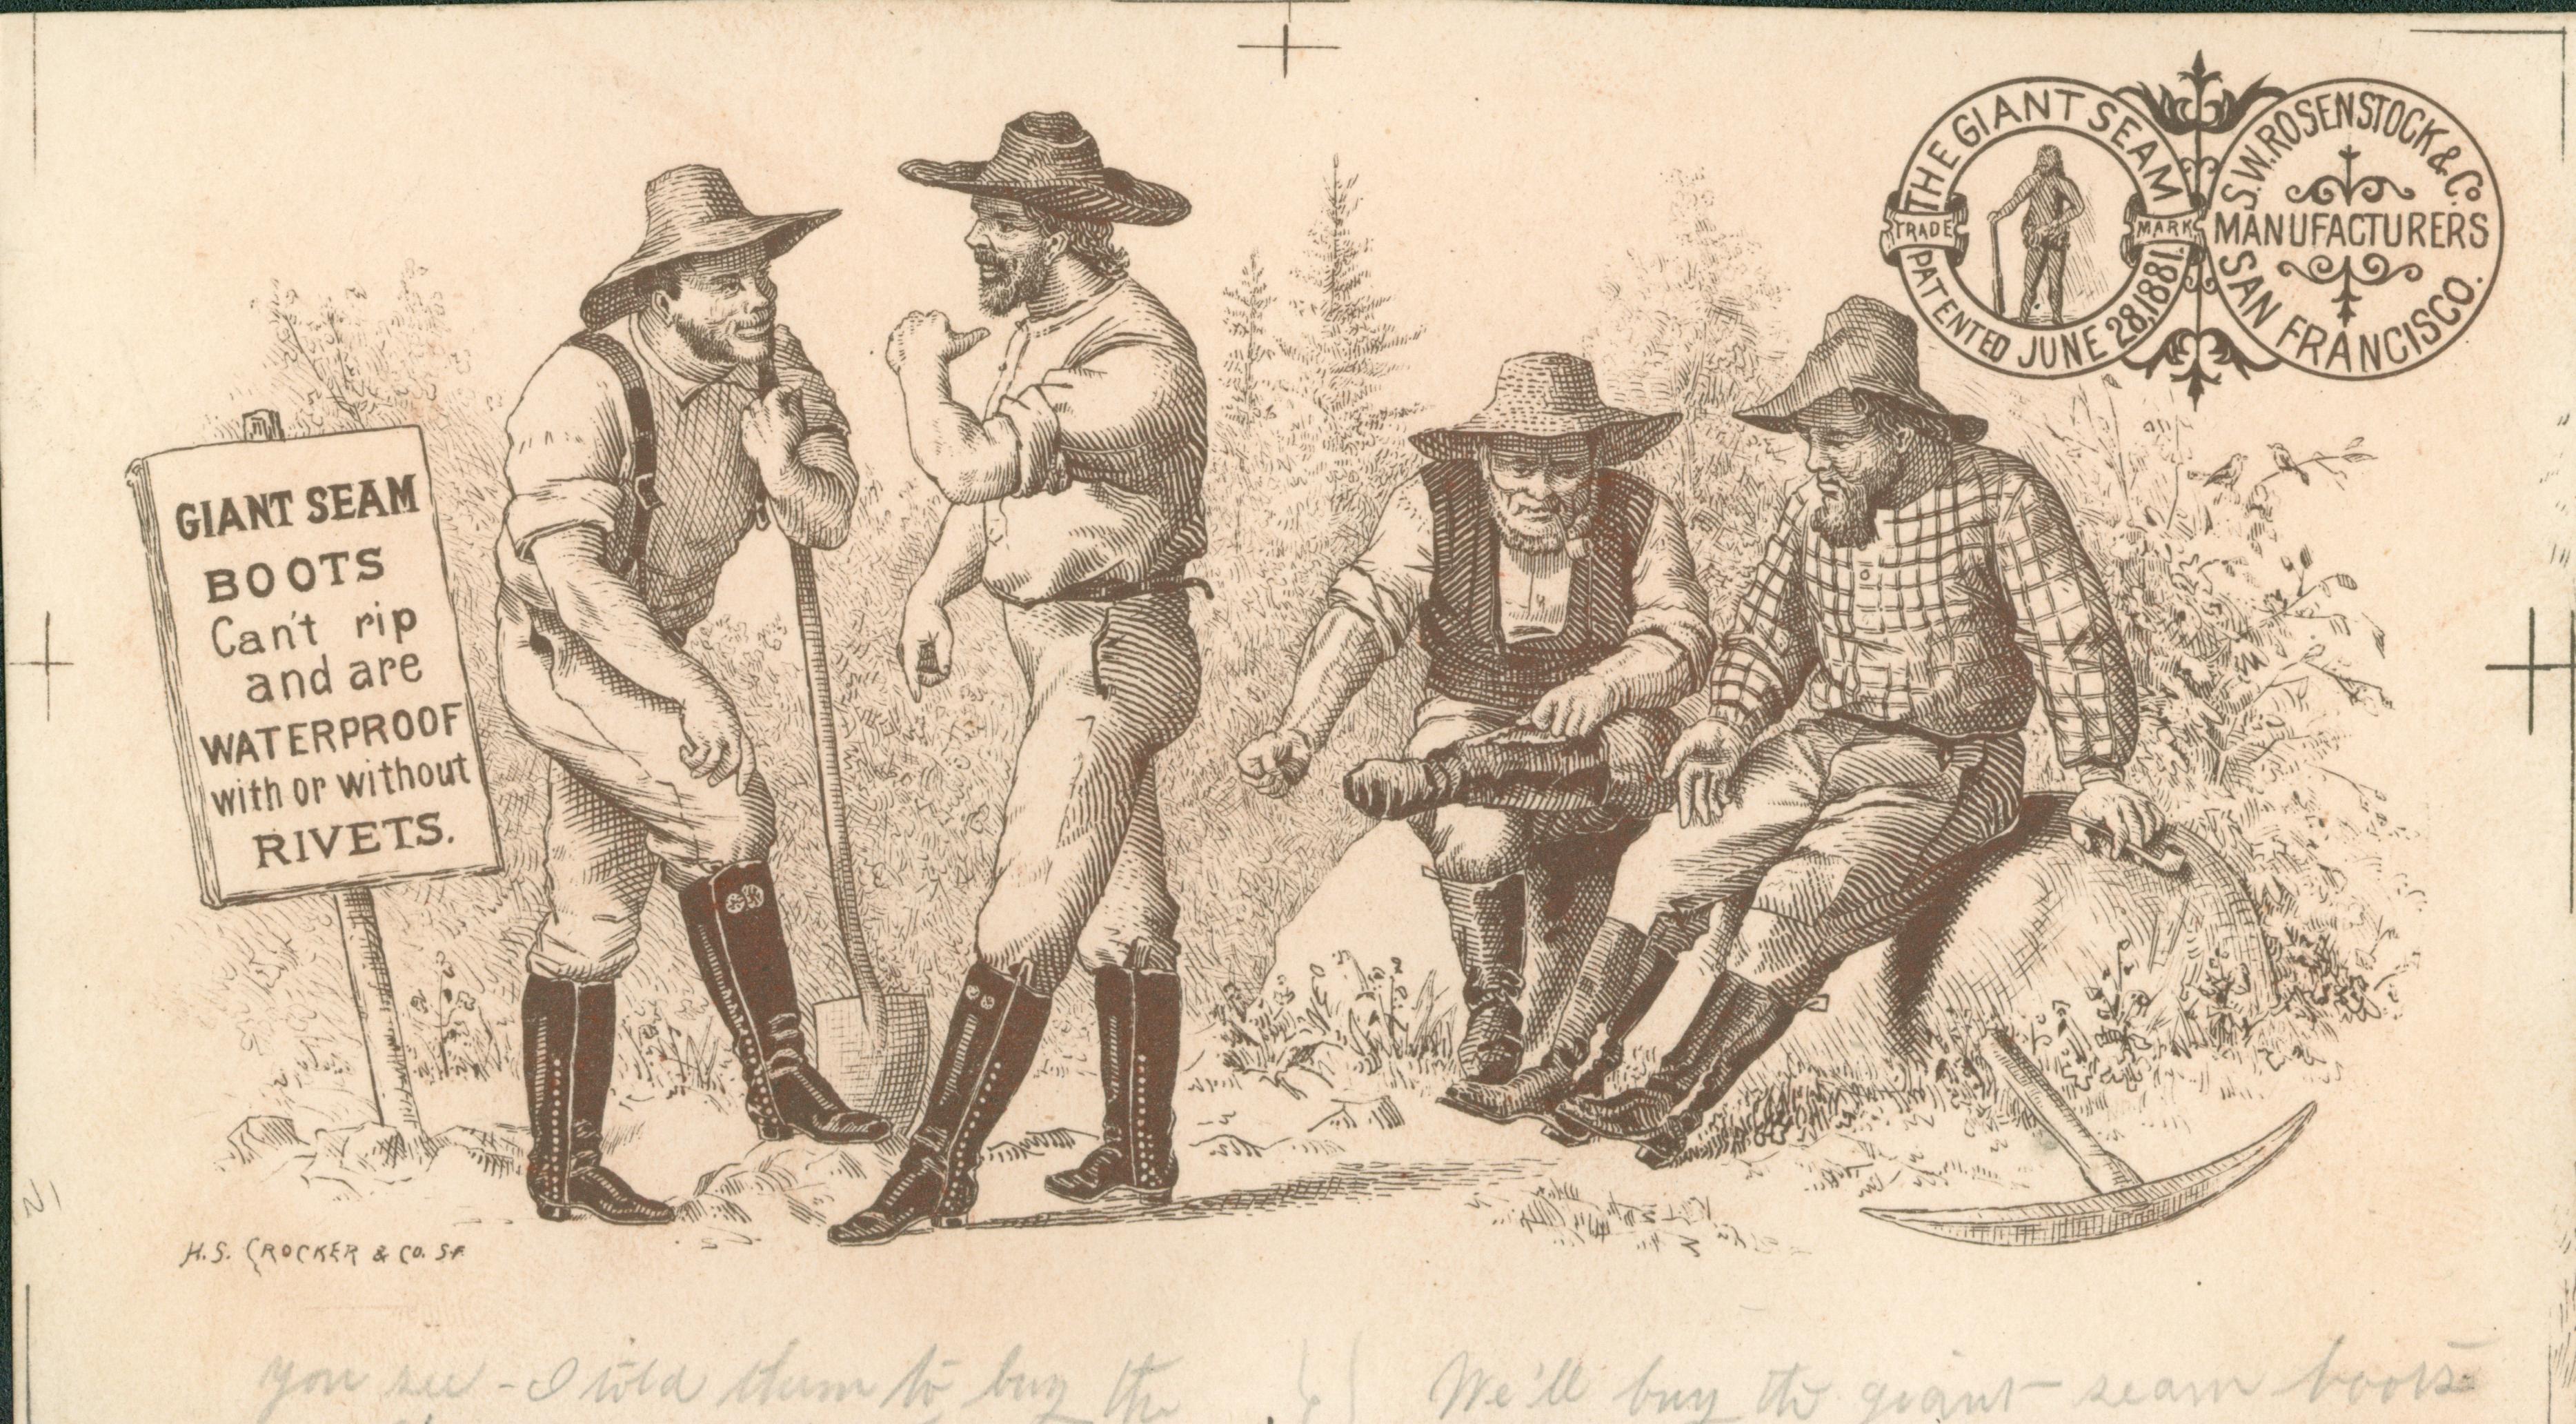 This trade card, shows four miners. Two are standing talking to each other while the other two are seated on a rock. All four of them are wearing Giant Seam Boots.